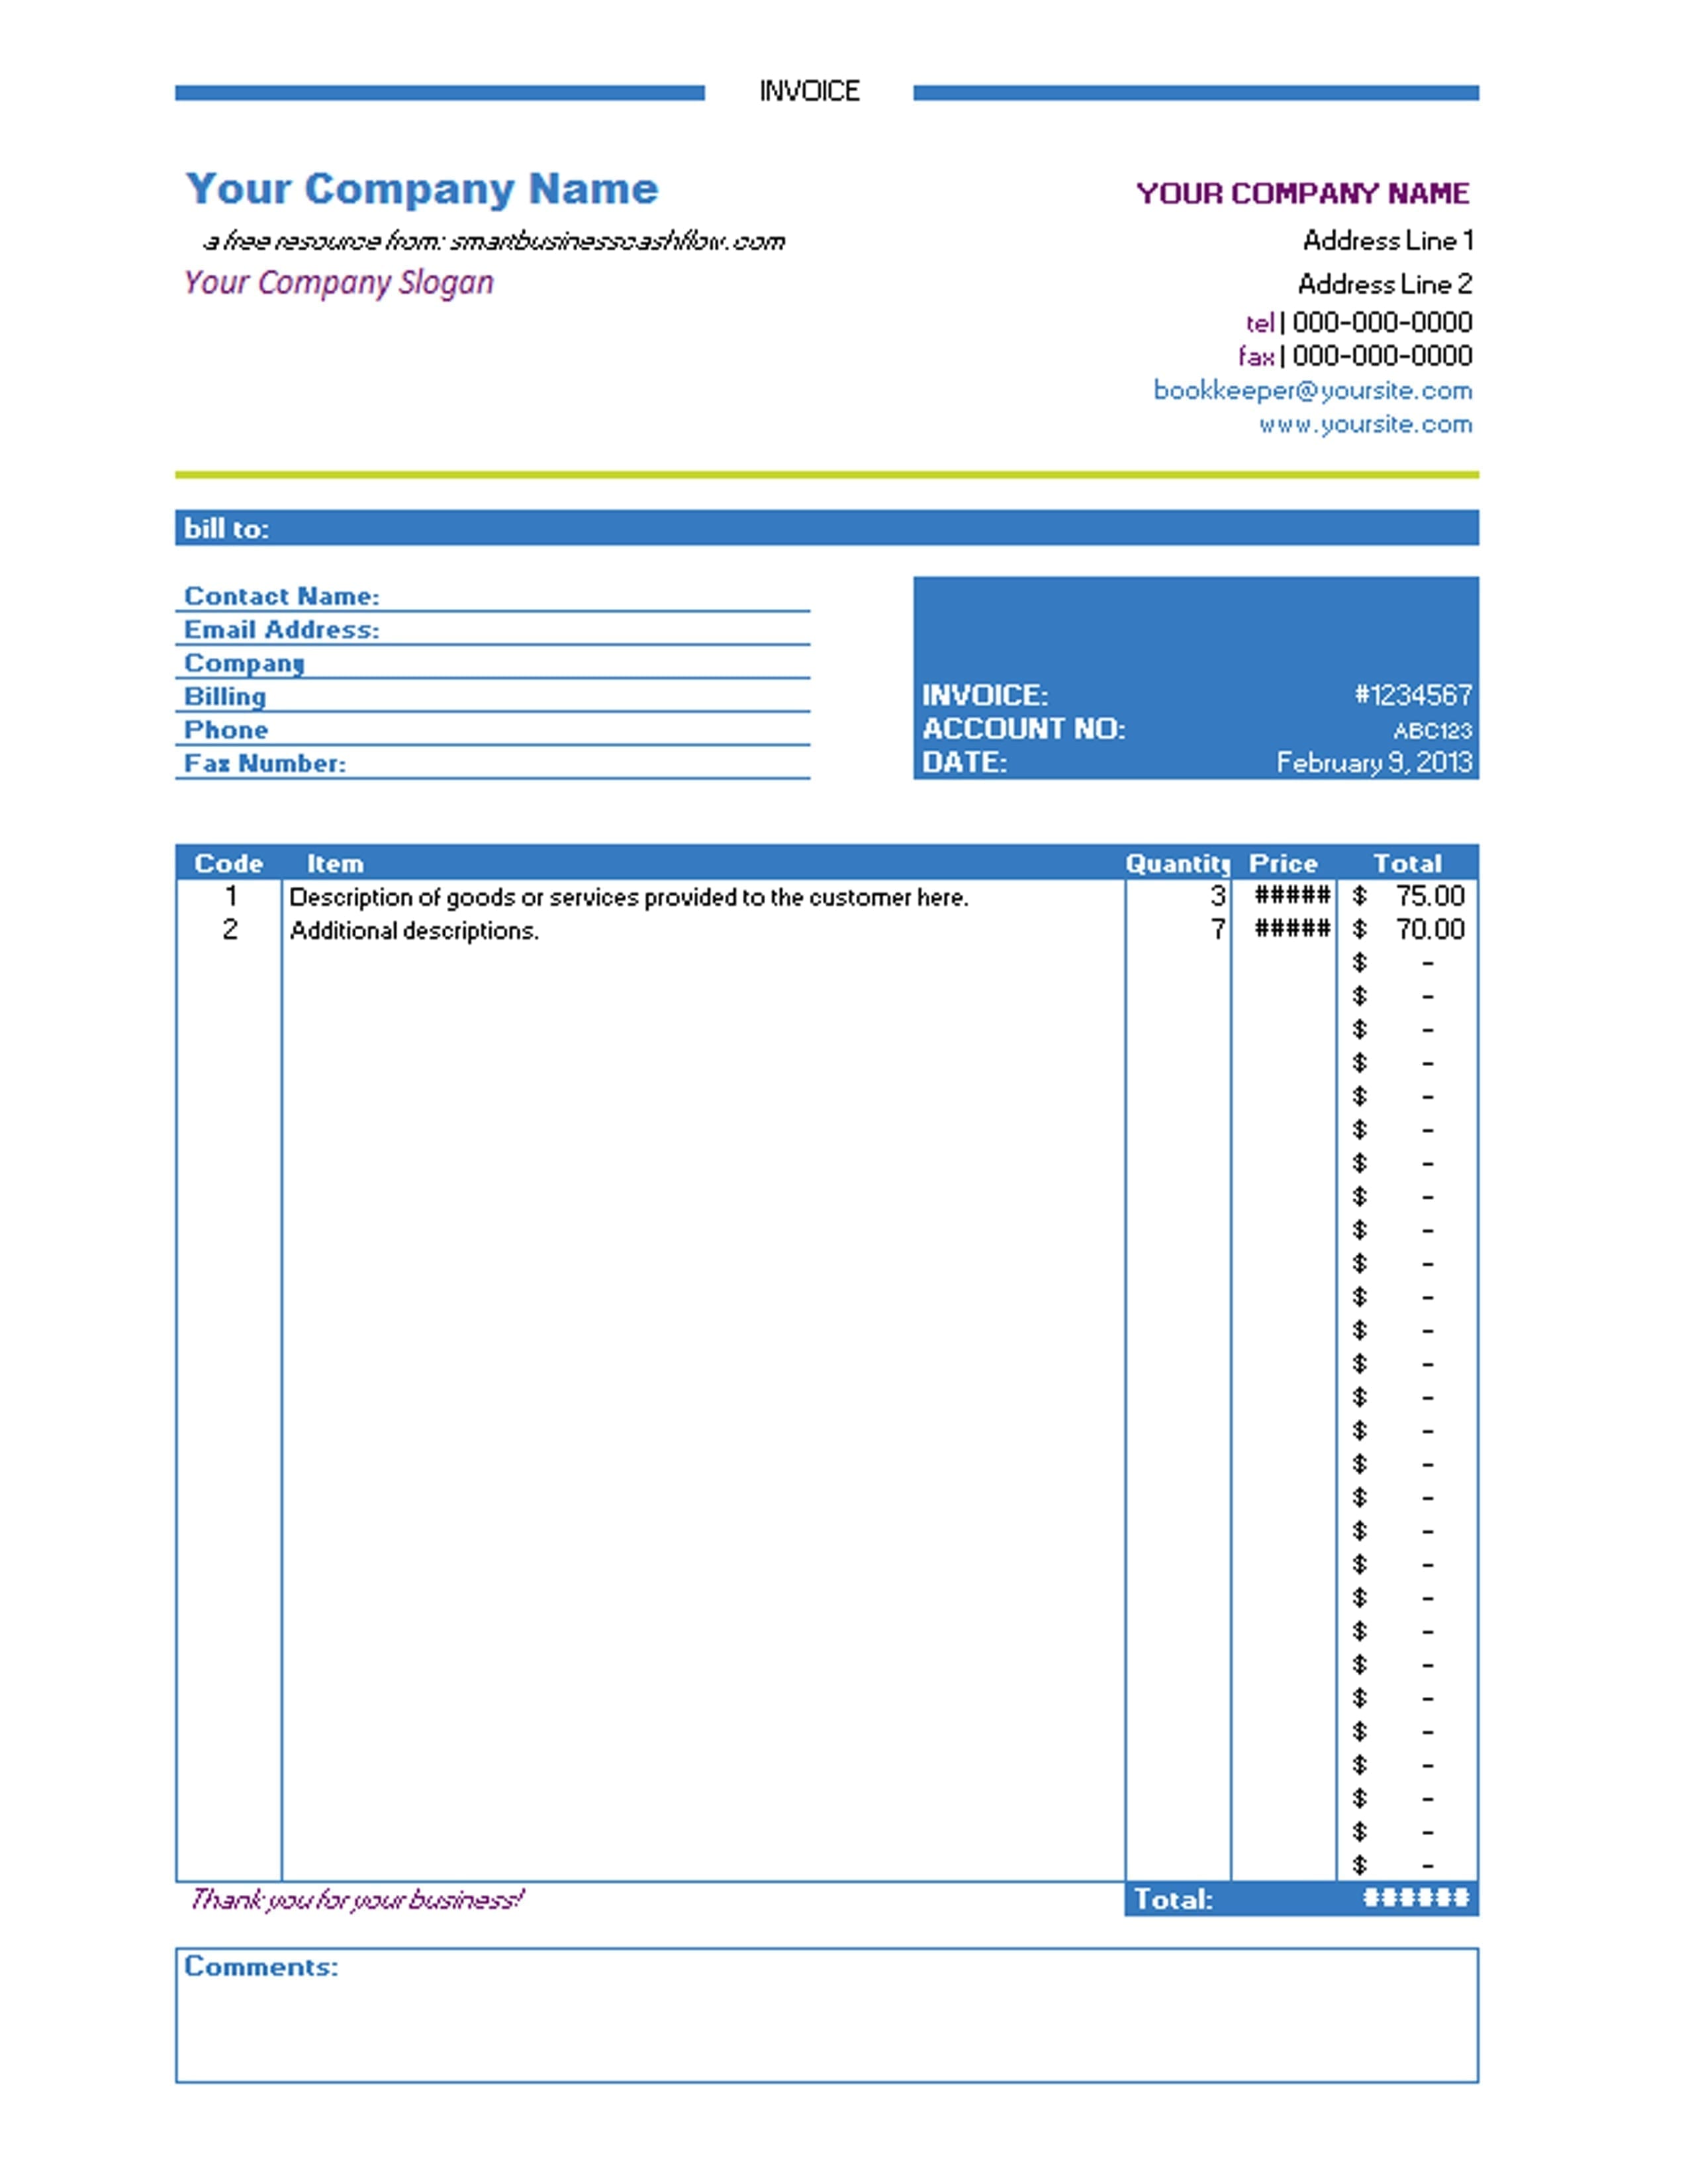 Invoice Template Excel Free Download Excelxo